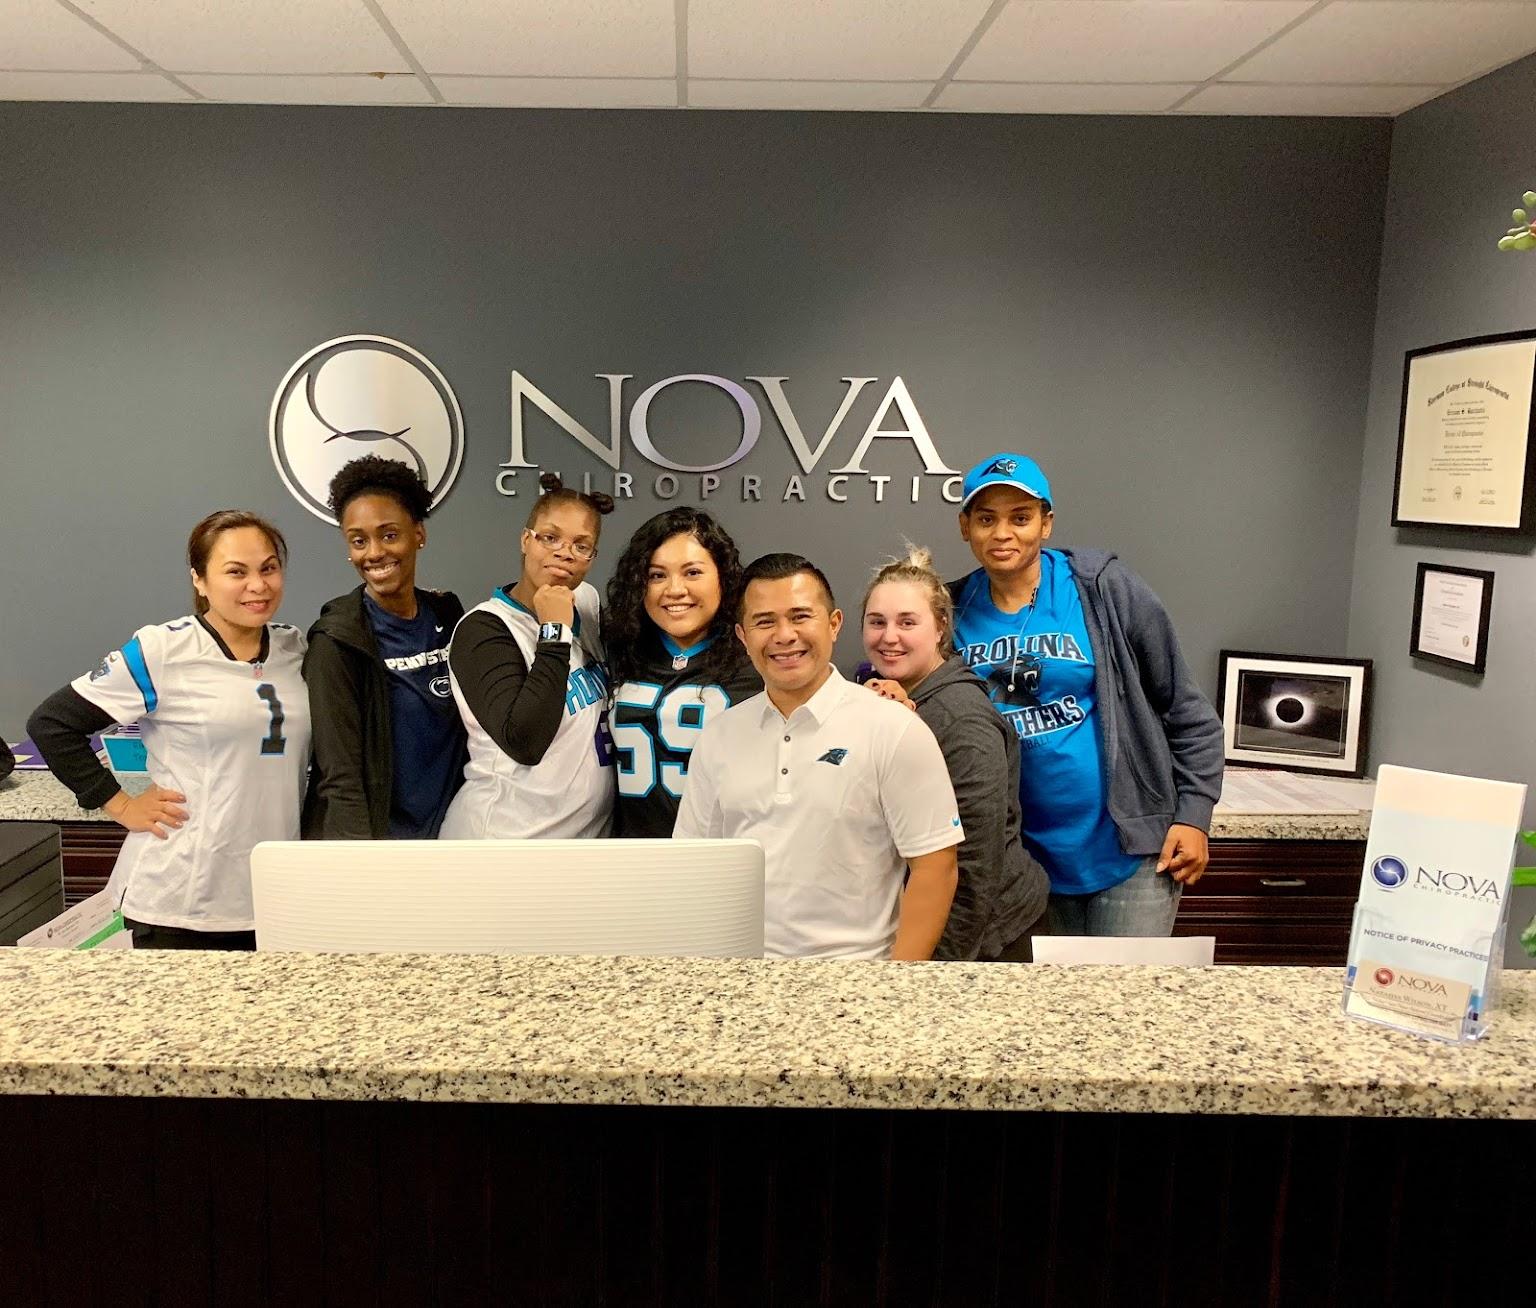 Nova Chiropractic reviews, photos, phone number and address Medical